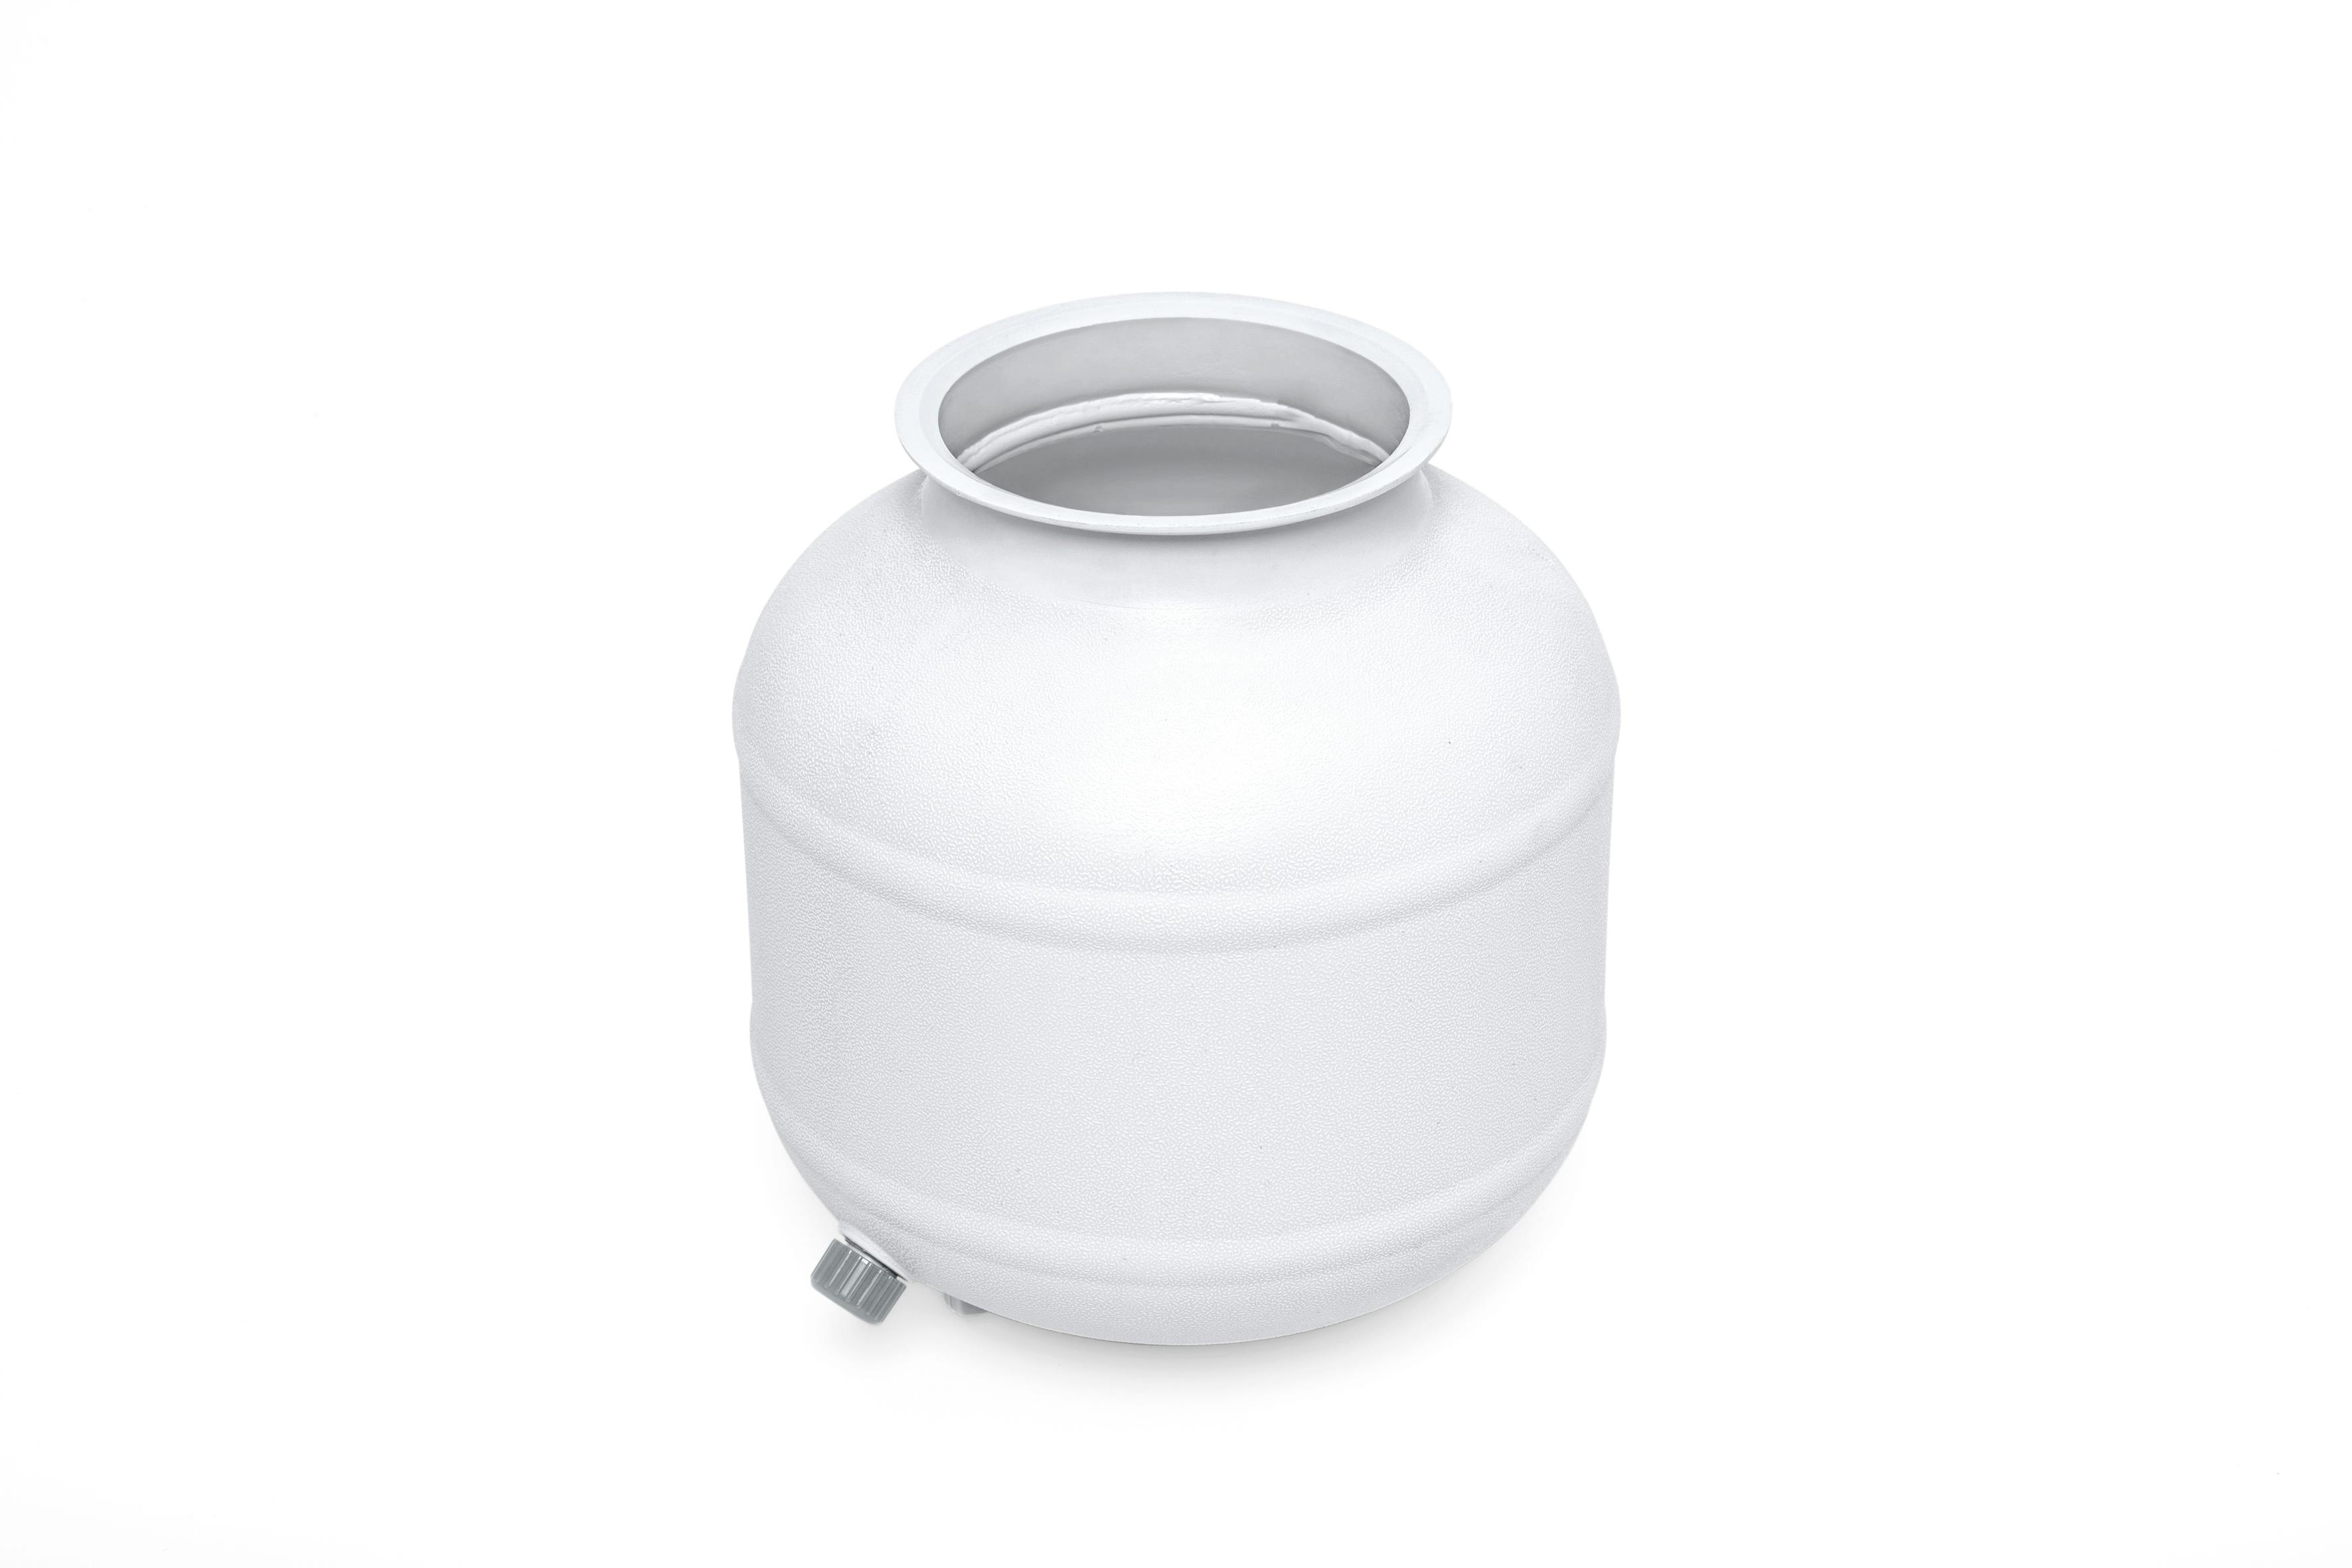 Tank for 8327L/2200gal Sand Filter(except GS)